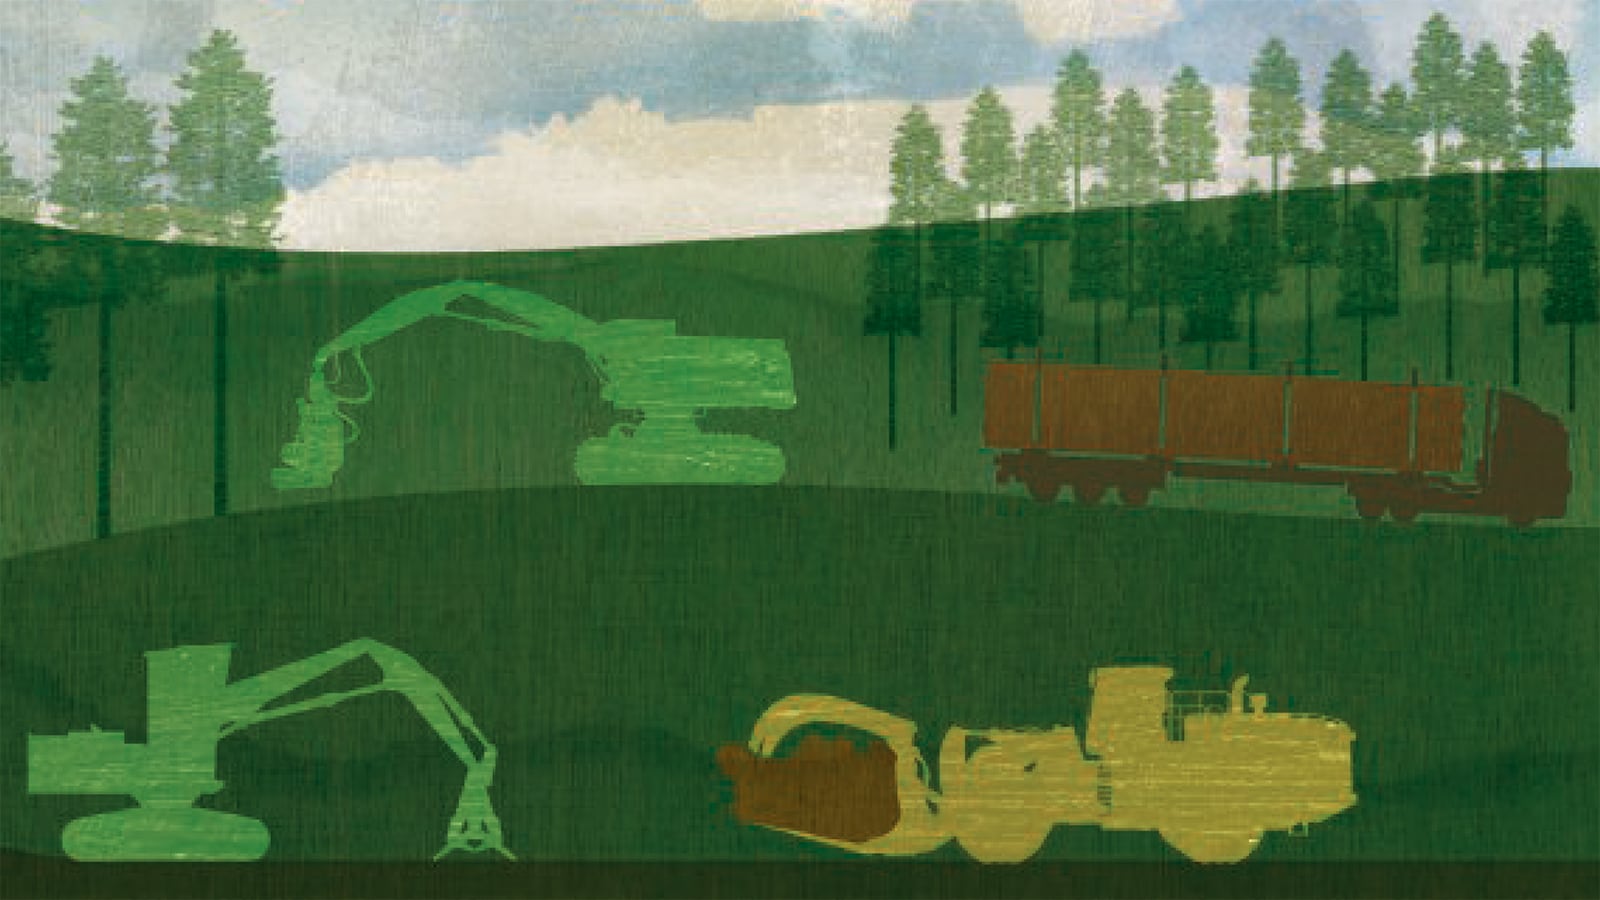 Illustration of a variety of forestry equipment working in the woods with blue sky with fluffy white clouds